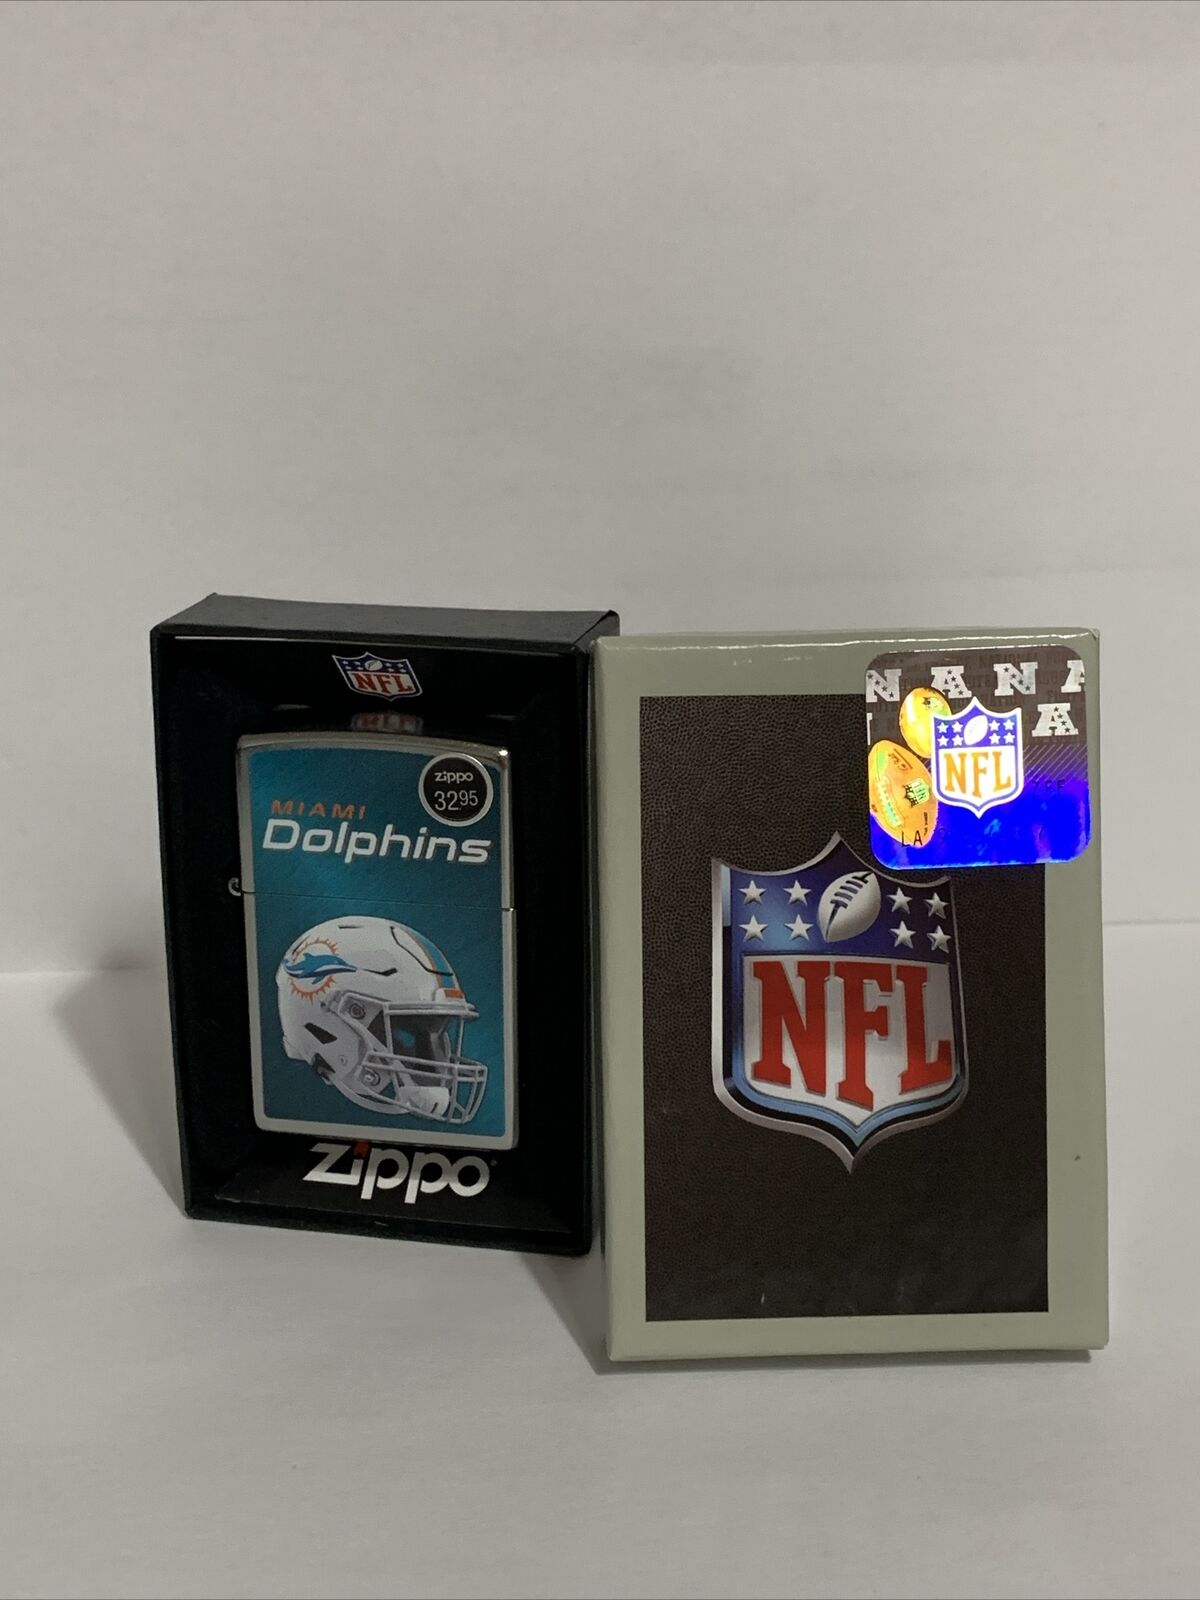 New in Box, Zippo Authentic Windproof Lighter, NFL Miami Dolphins, 48438